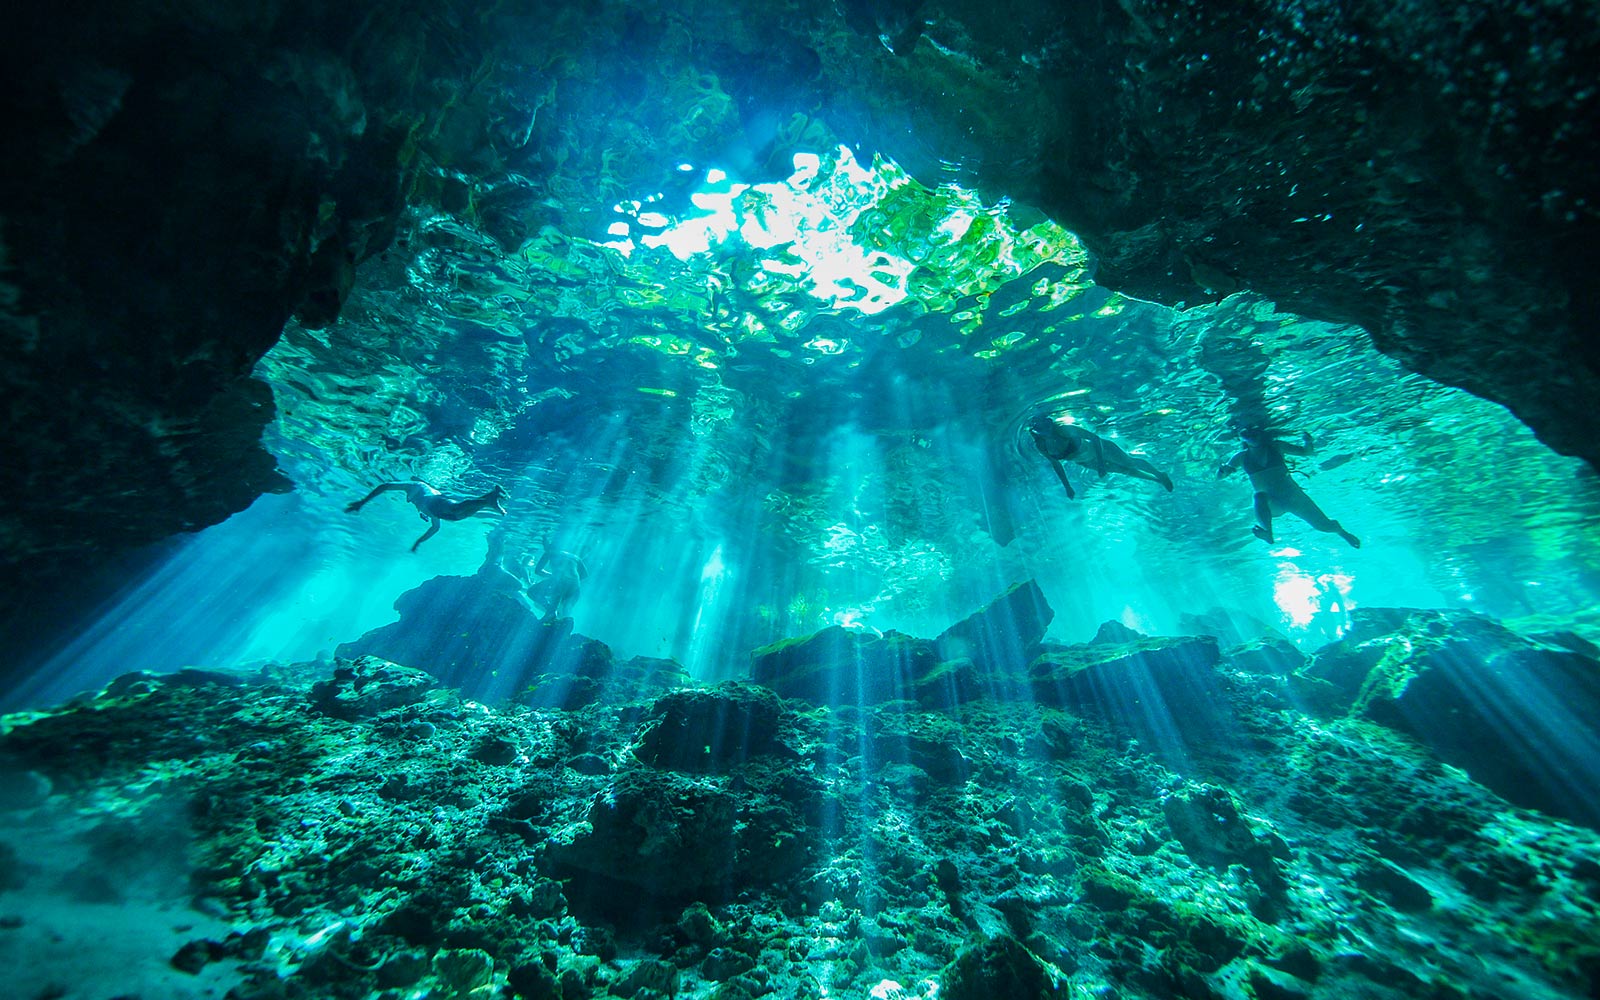 An underwater scene which brightens with rays of light shining into the water (play the video).